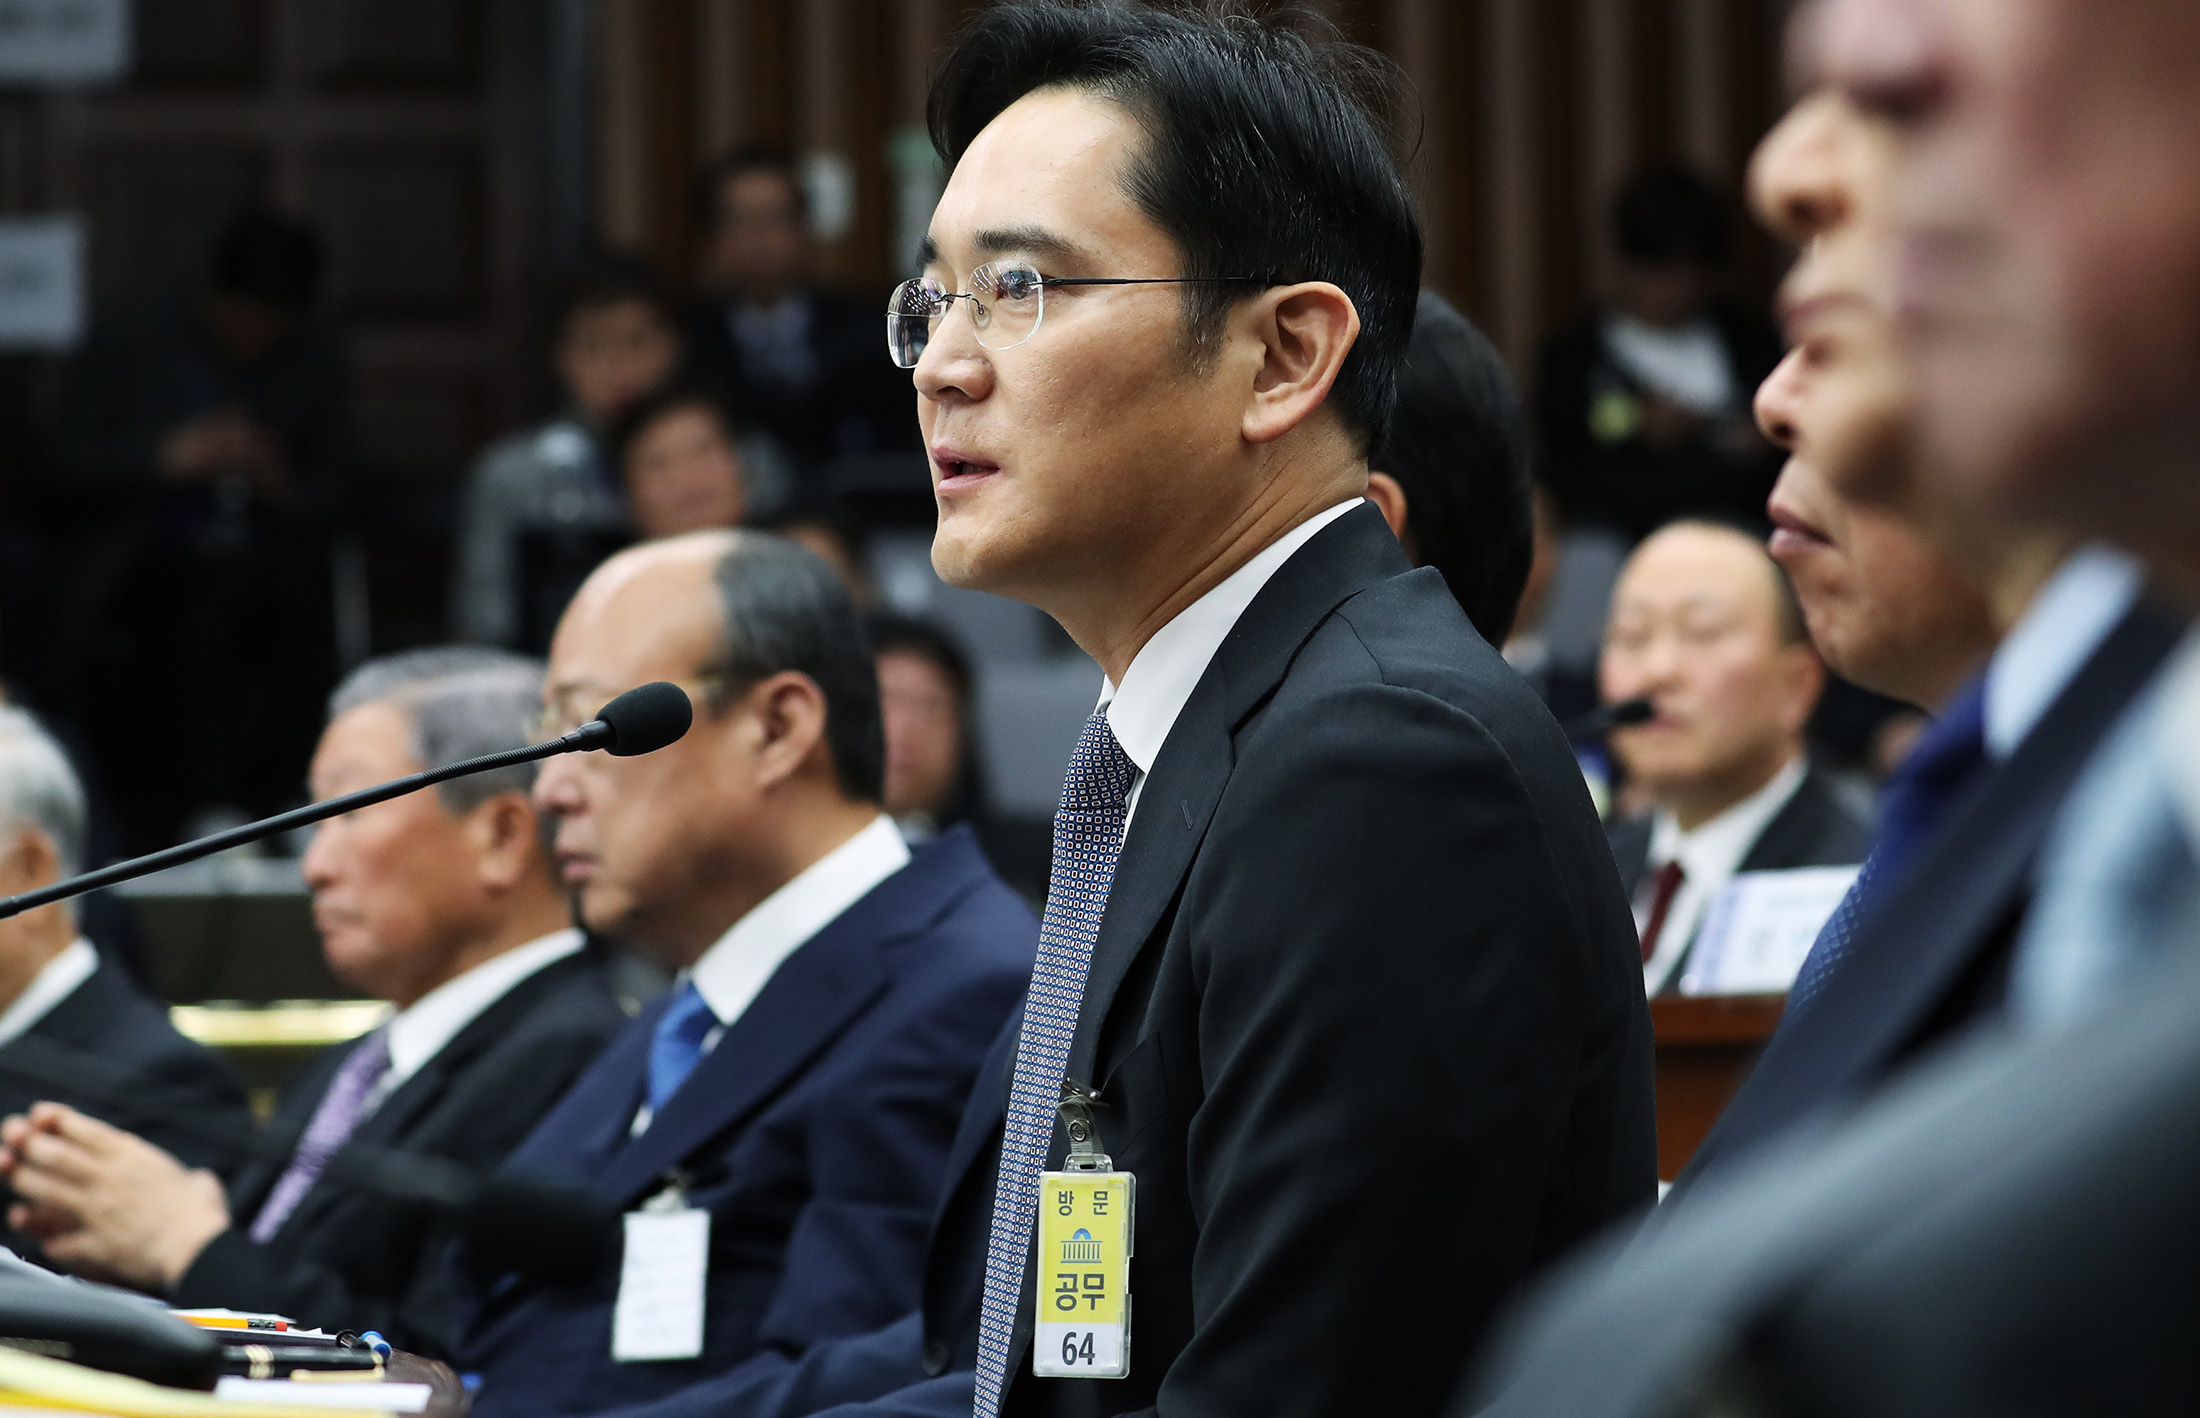 Jay Y. Lee, co-vice chairman of Samsung Electronics Co., center, speaks during a parliamentary hearing at the National Assembly in Seoul, on Dec. 6, 2016.
